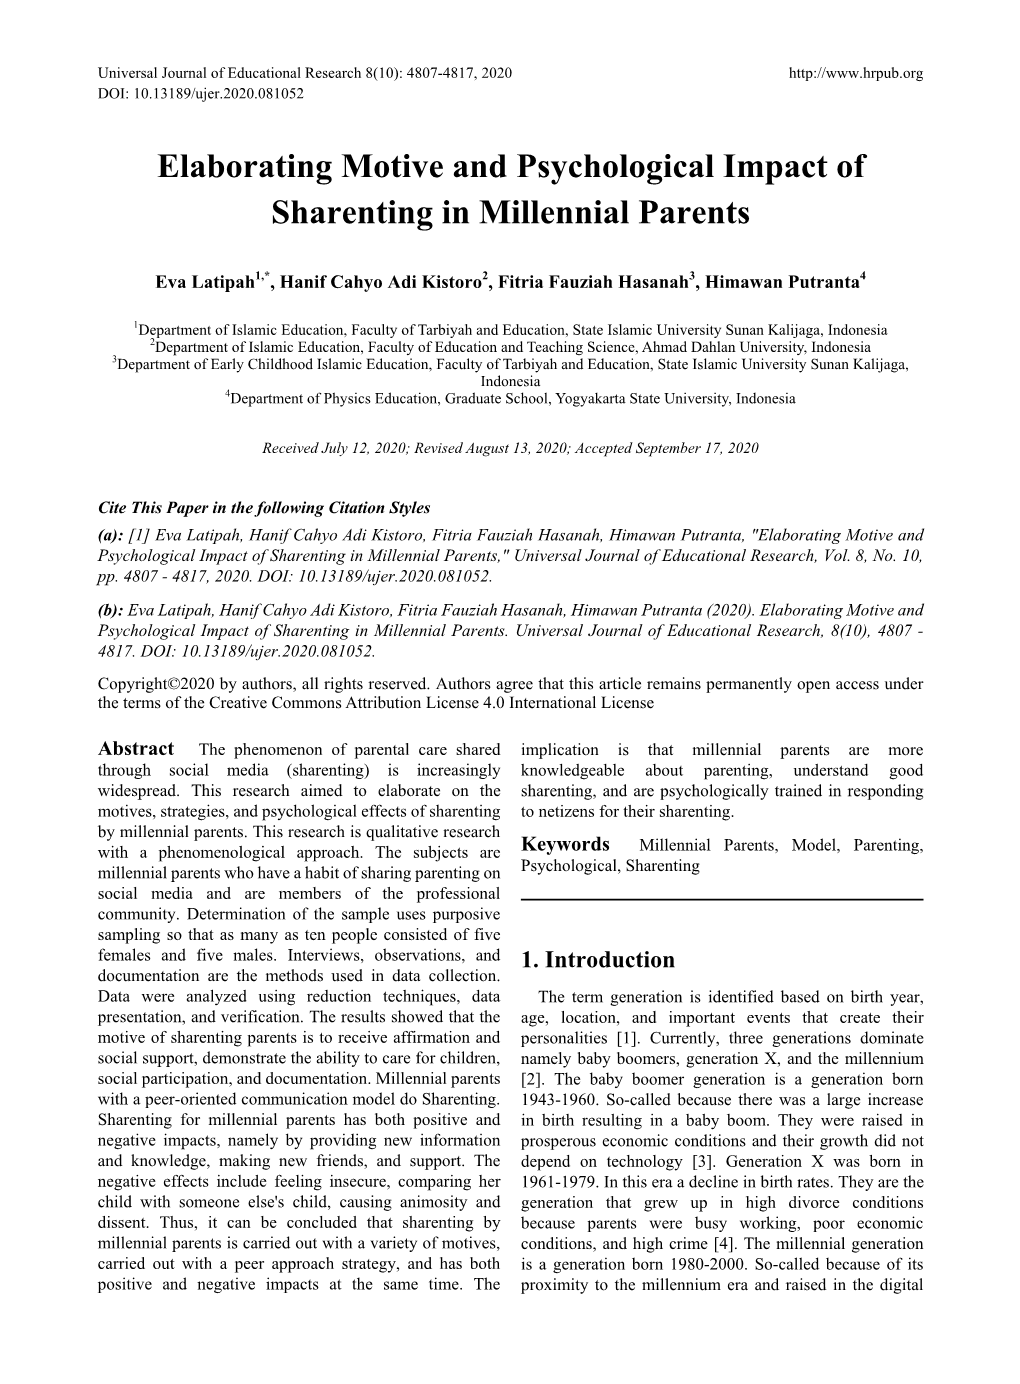 Elaborating Motive and Psychological Impact of Sharenting in Millennial Parents